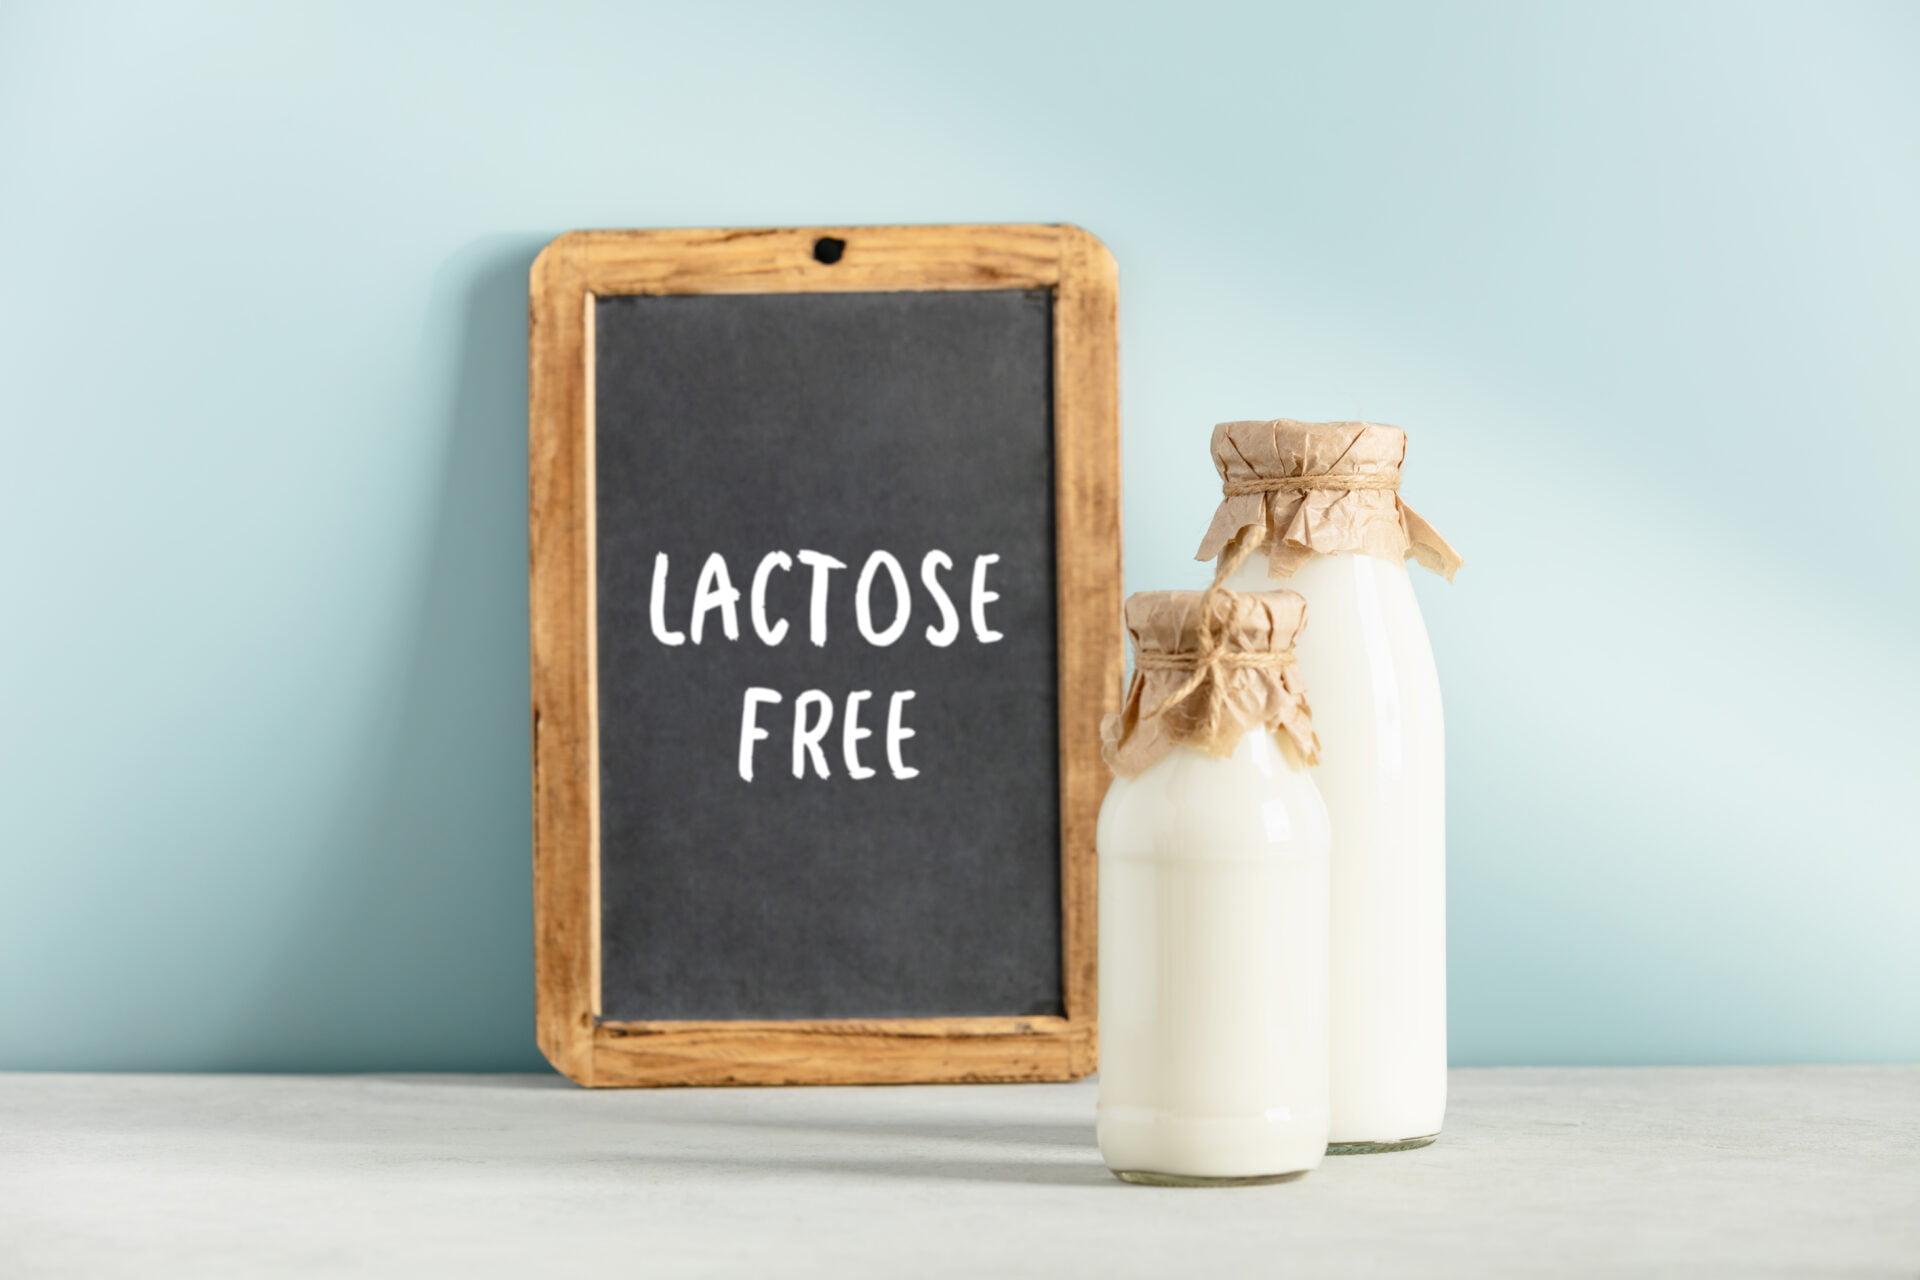 Non dairy plant based milk in bottles and chalkboard with Lactose free lettering on light blue background. Alternative lactose free milk substitute